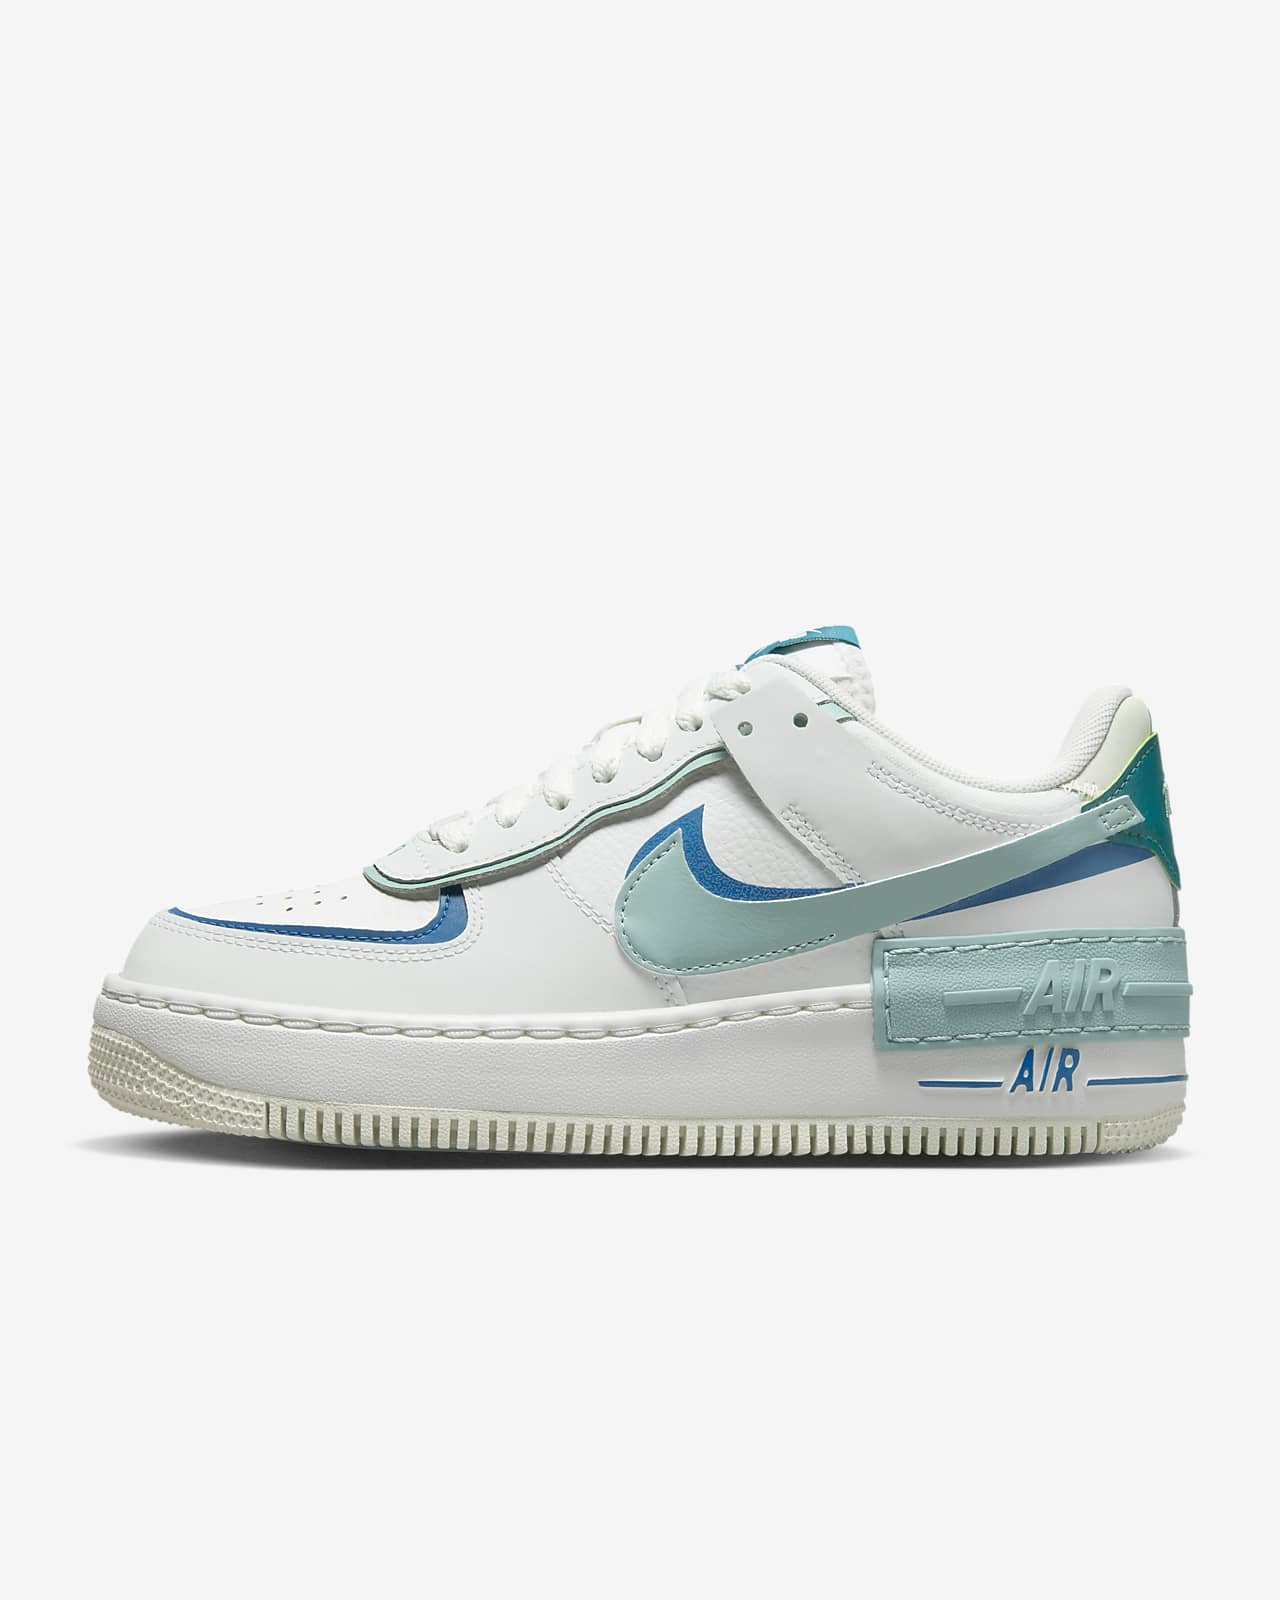 Nike Air Force 1 Shadow sneakers in white/glacier blue